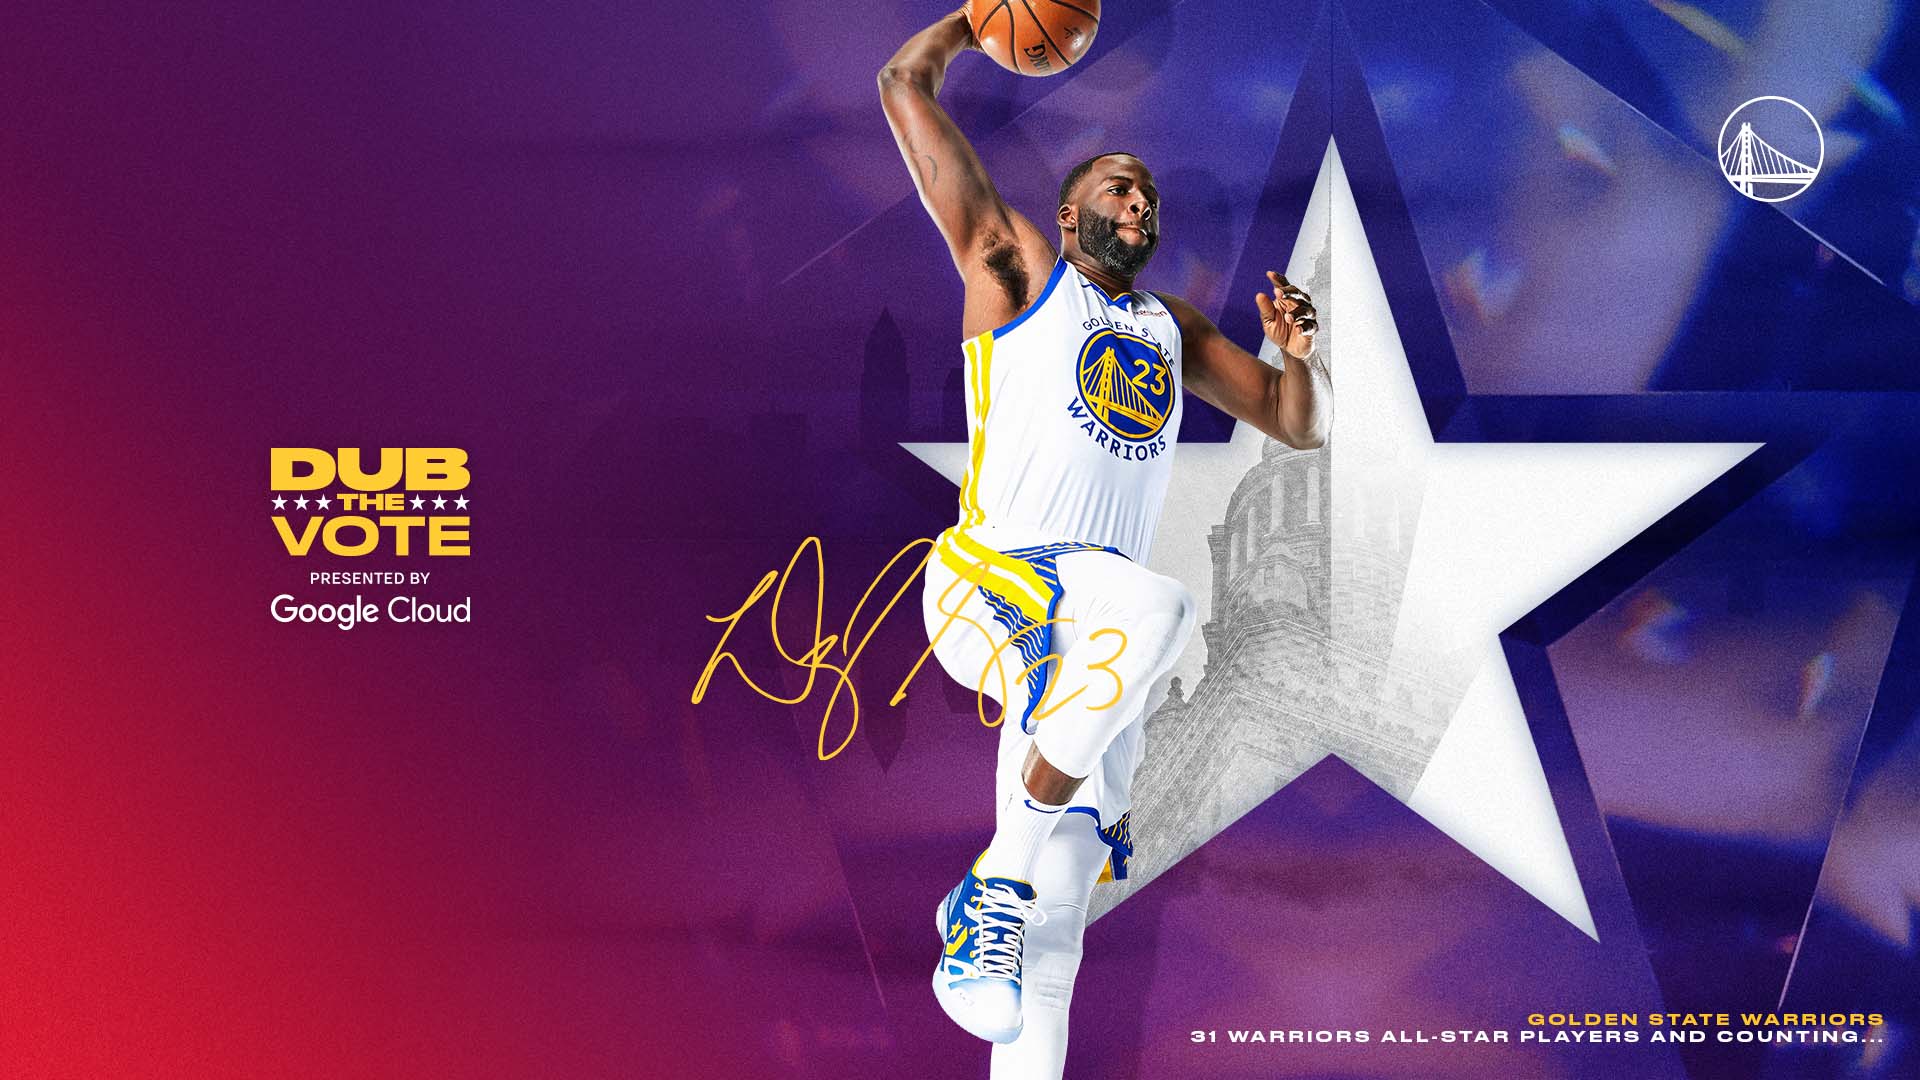 Dub The Vote NBA All Star. Golden State Warriors